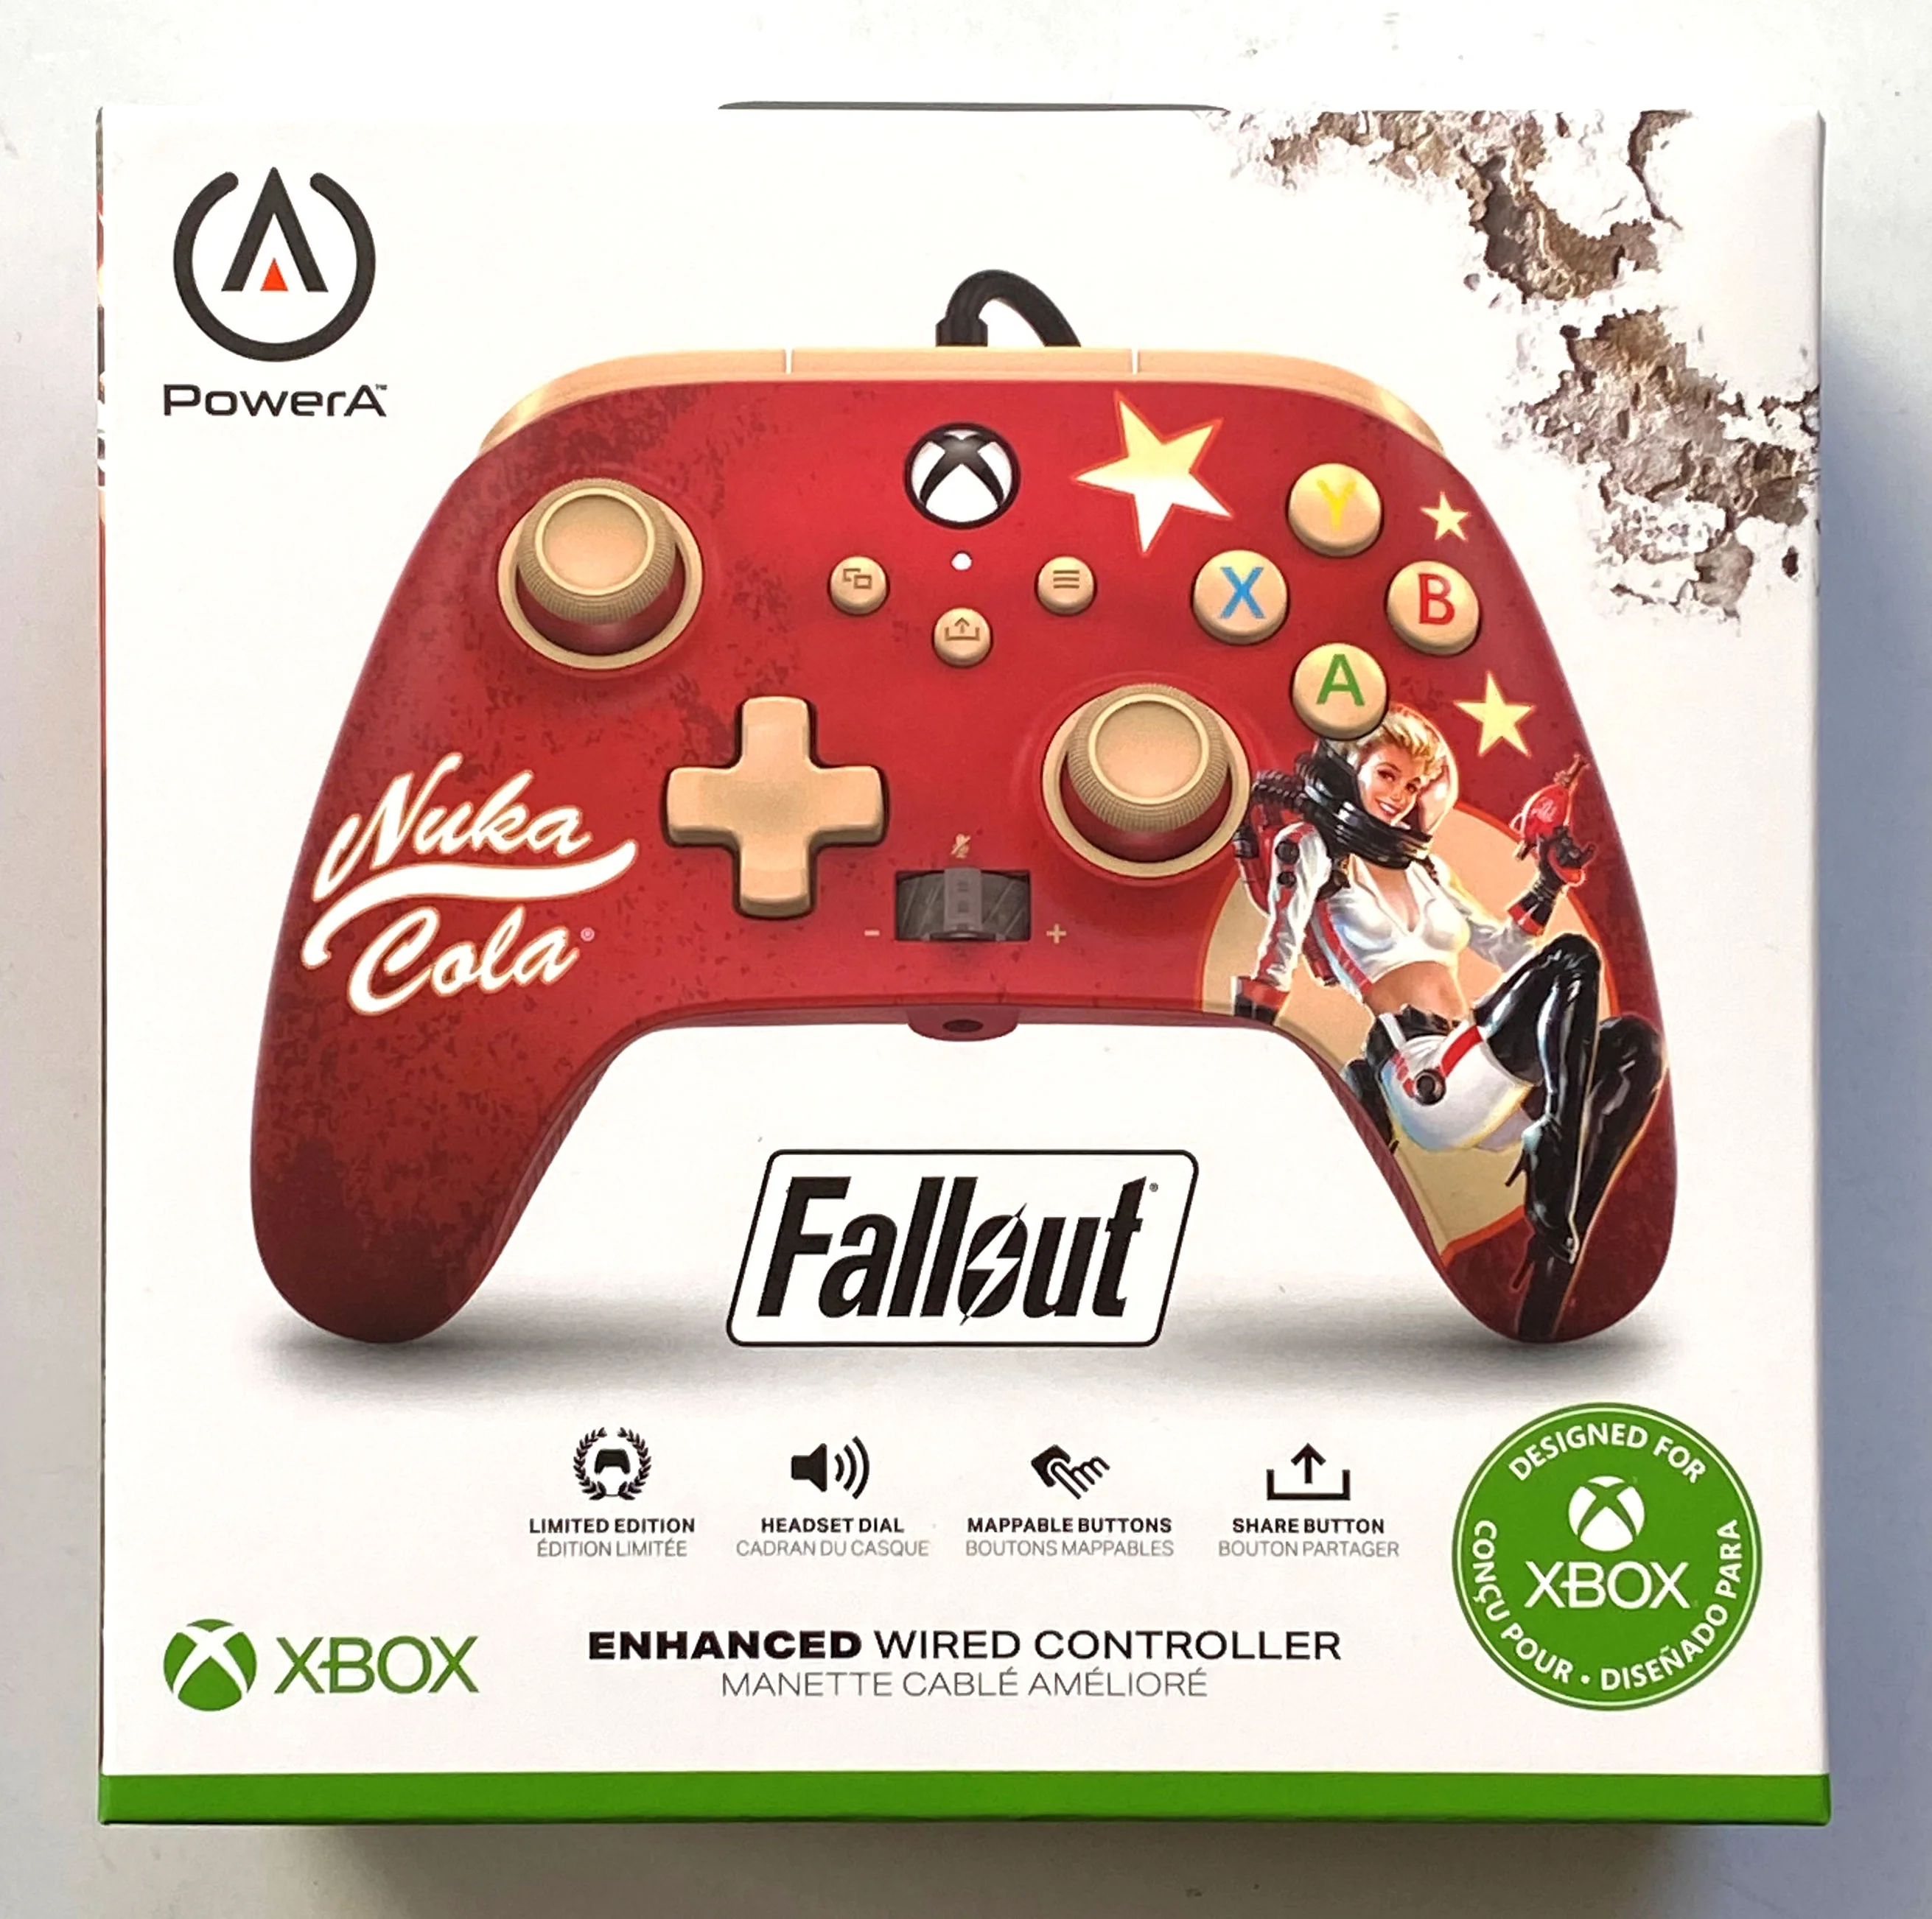  Power A Xbox Series X Fallout Nuka Cola Wired Controller